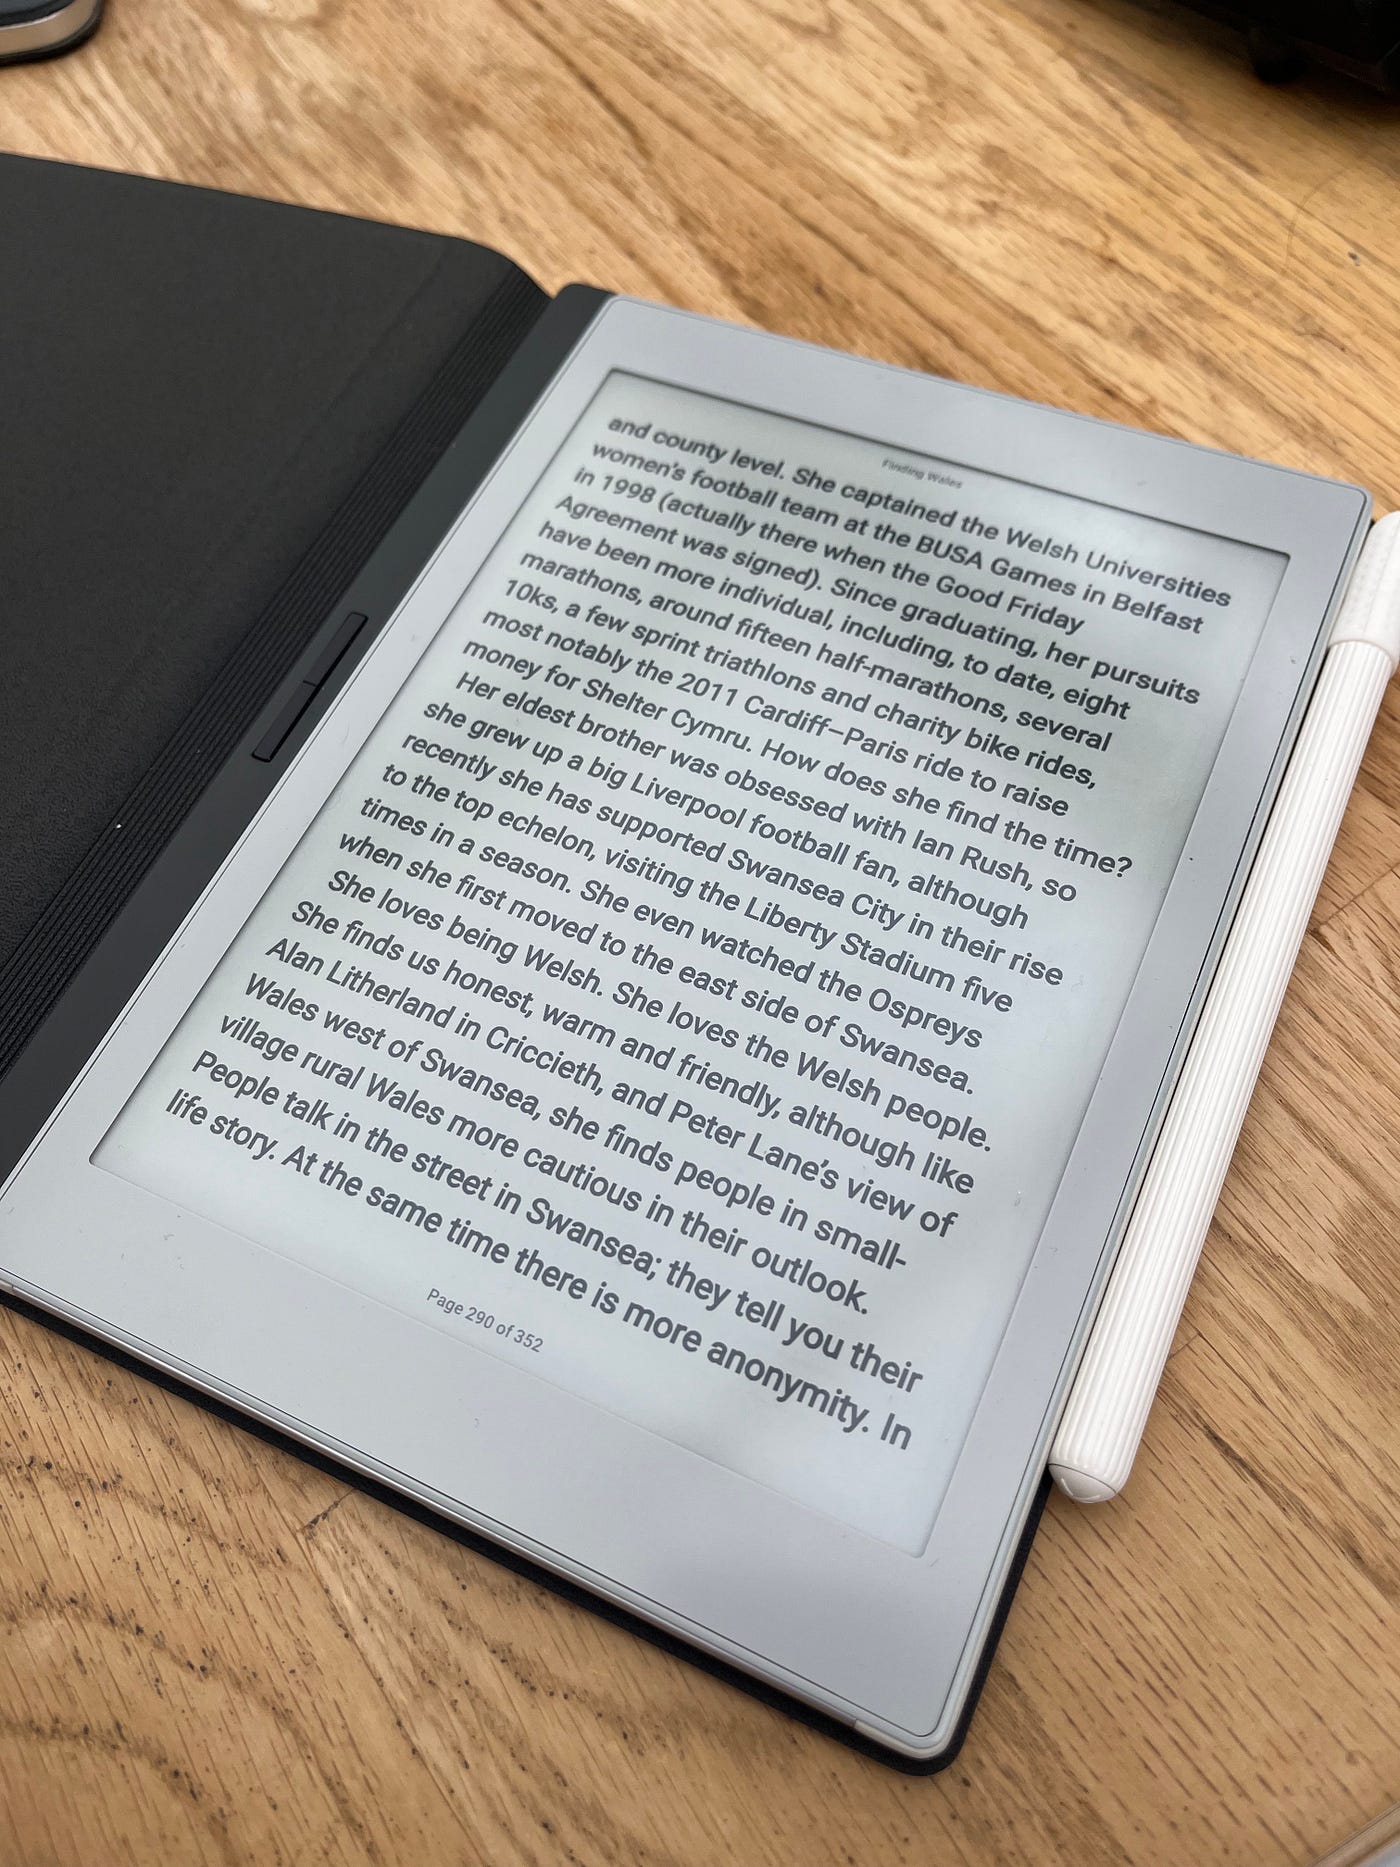 Onyx Boox Note Air Hands on Review - Good e-Reader